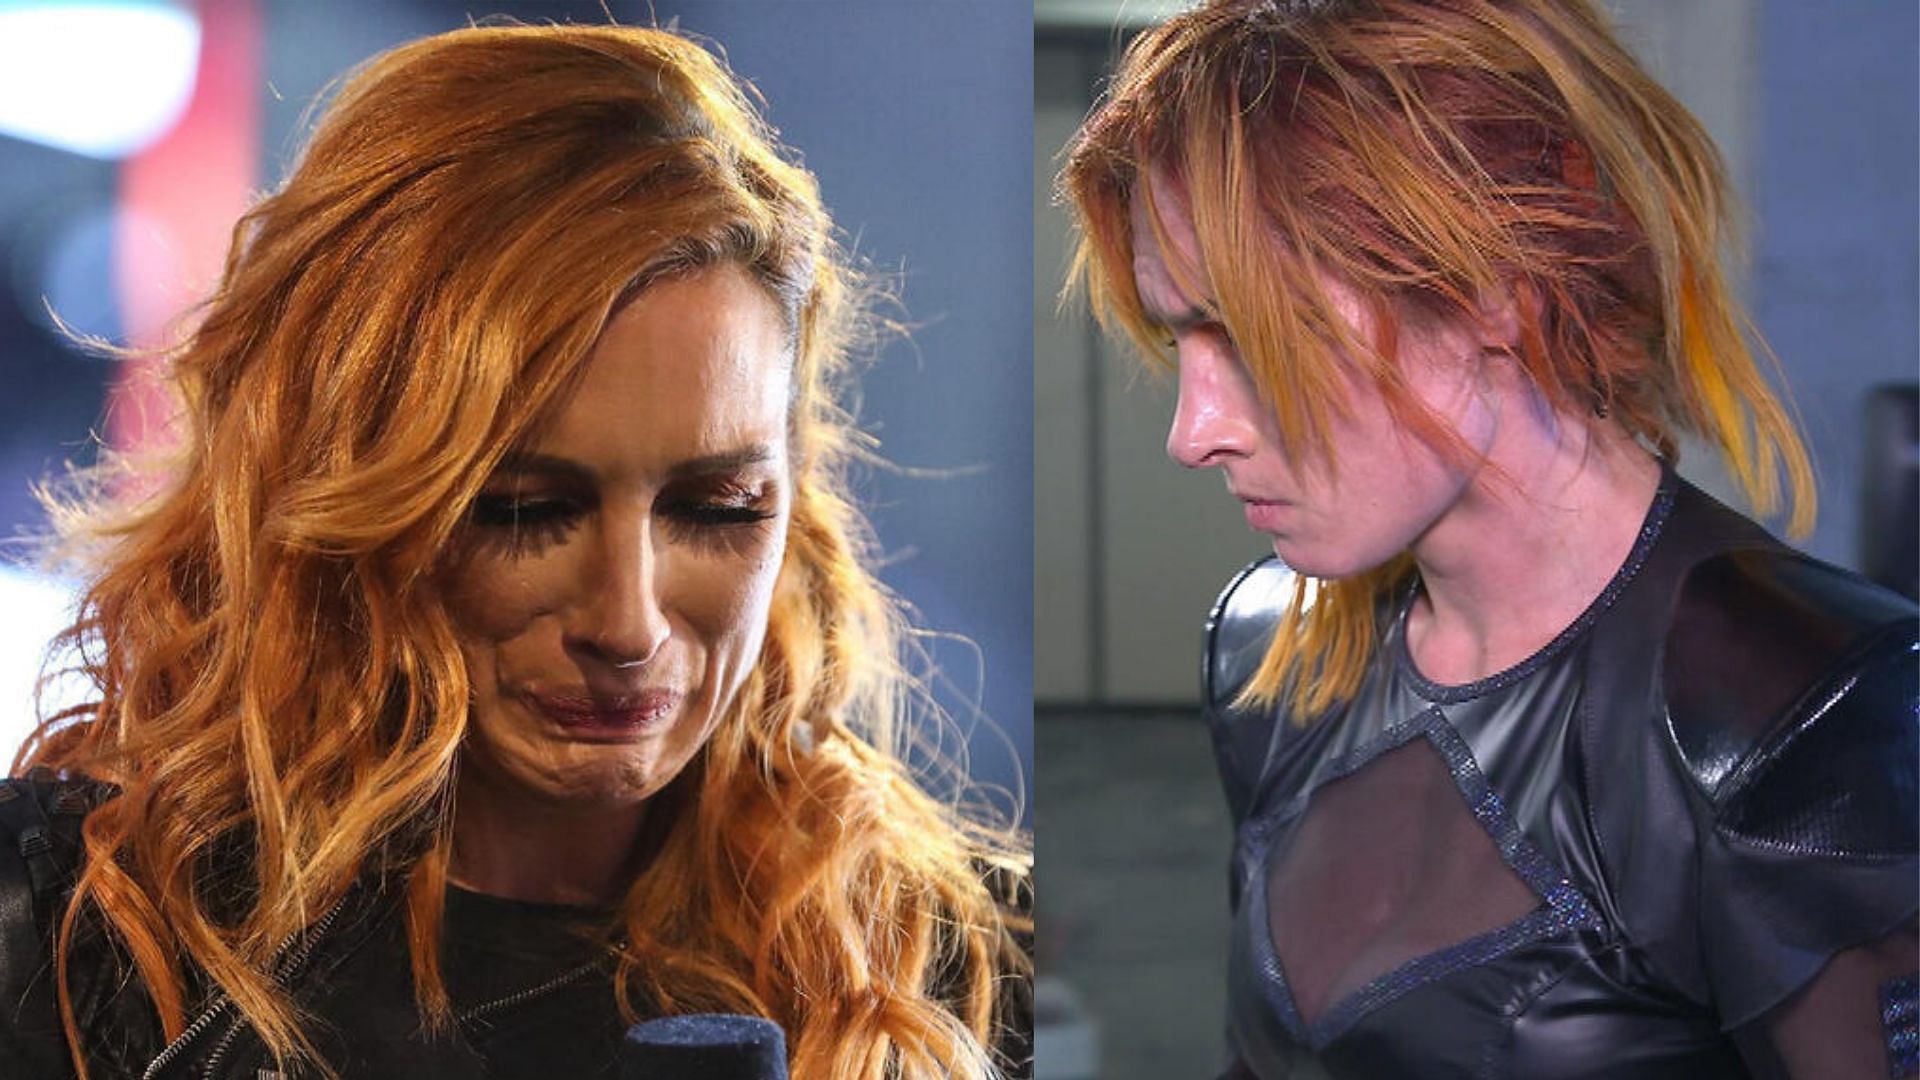 Becky Lynch is well-liked backstage in WWE.